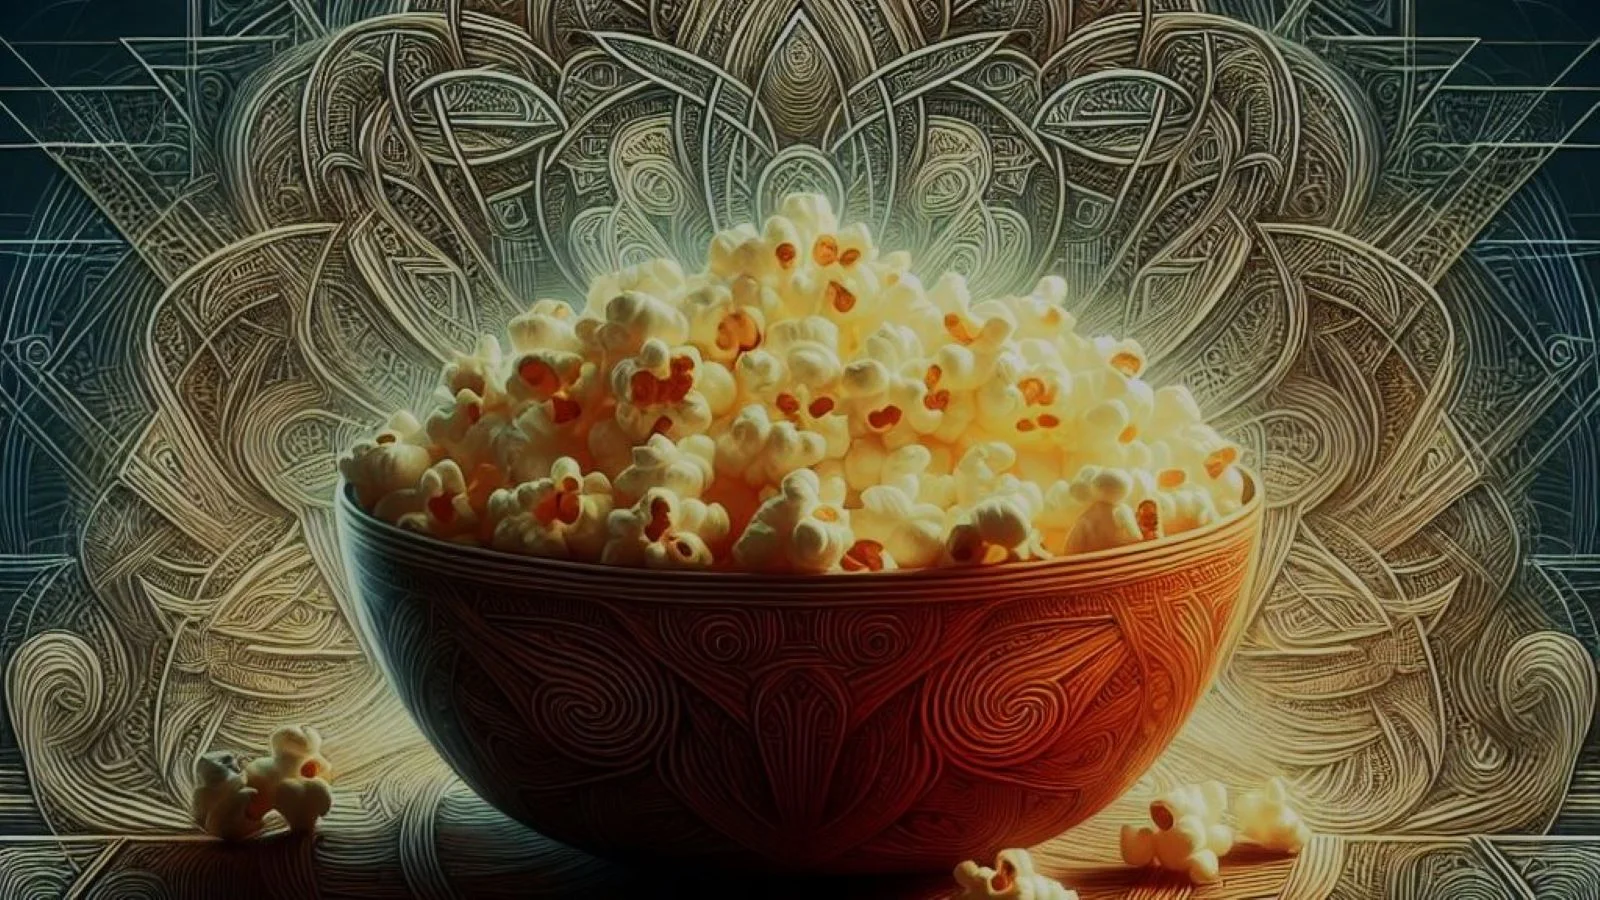 Being as I'm diabetic I can't always eat what my taste buds crave. But popcorn is a pretty harmless indulgence. At least compared to Black Forest Cake!  The Green Man